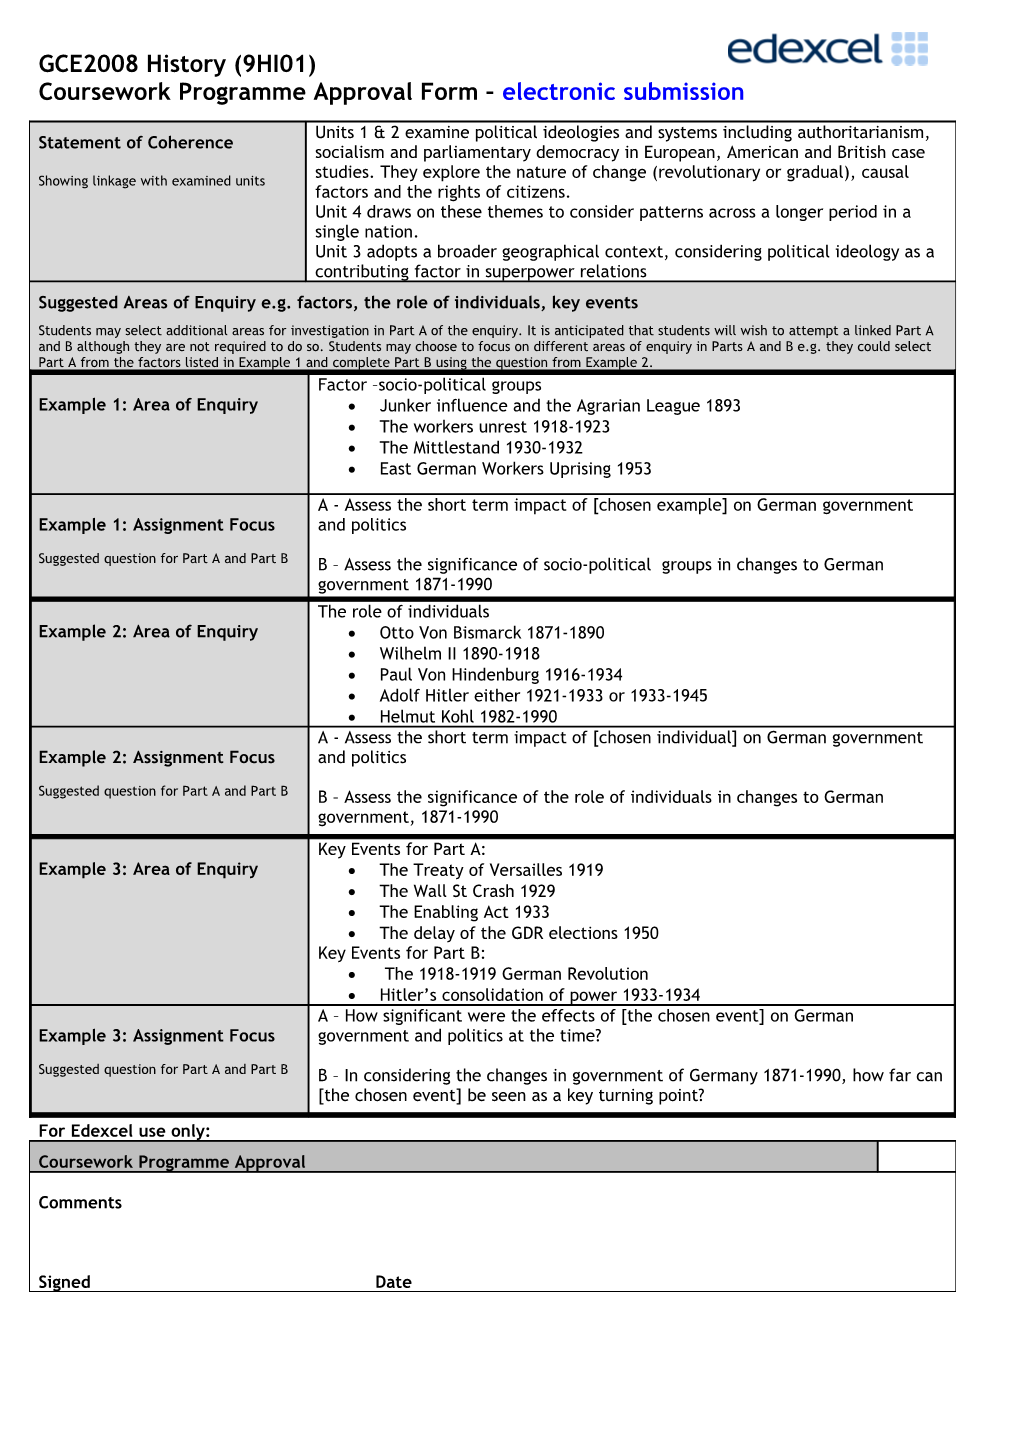 GCE History Coursework Programme Approval Form Page 1 of 2